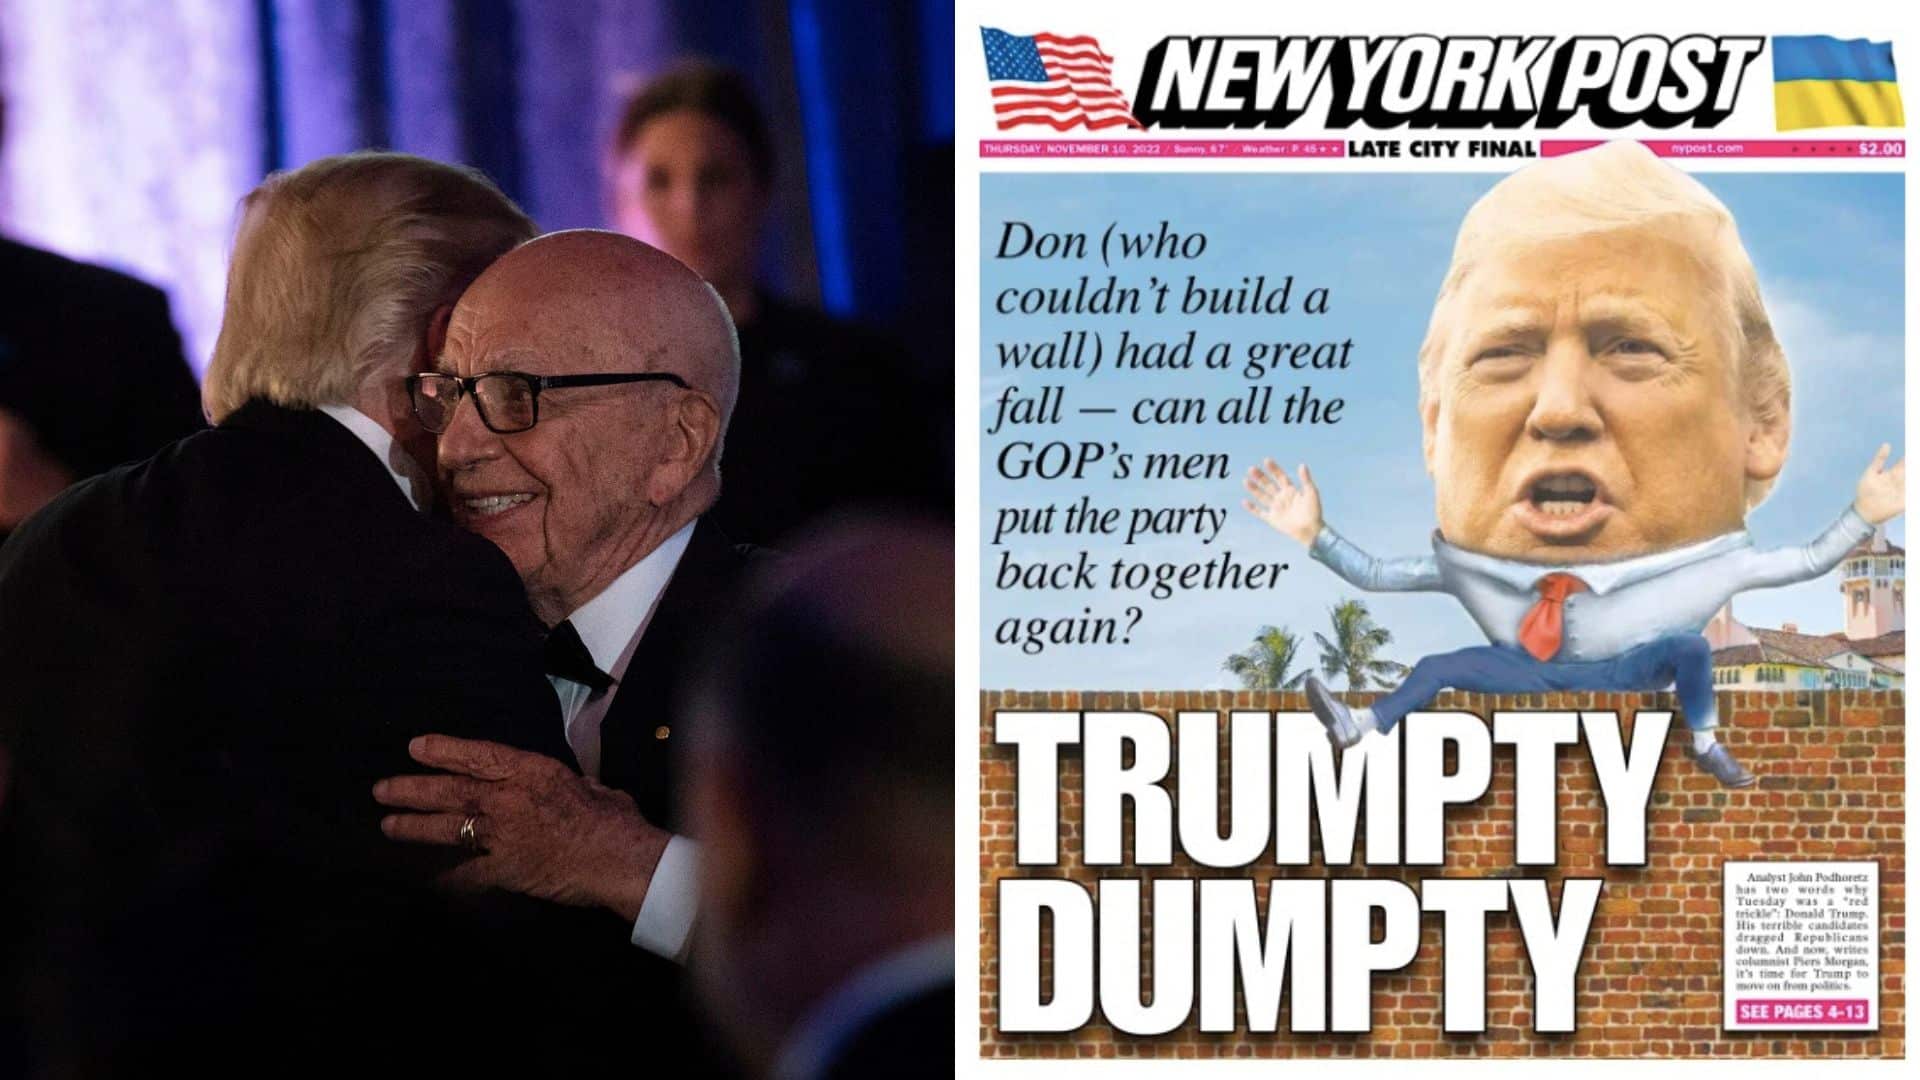 Murdoch Reportedly Tells Trump His Political Career is ‘Over,’ Threatens to Back Democratic Opponent in 2024